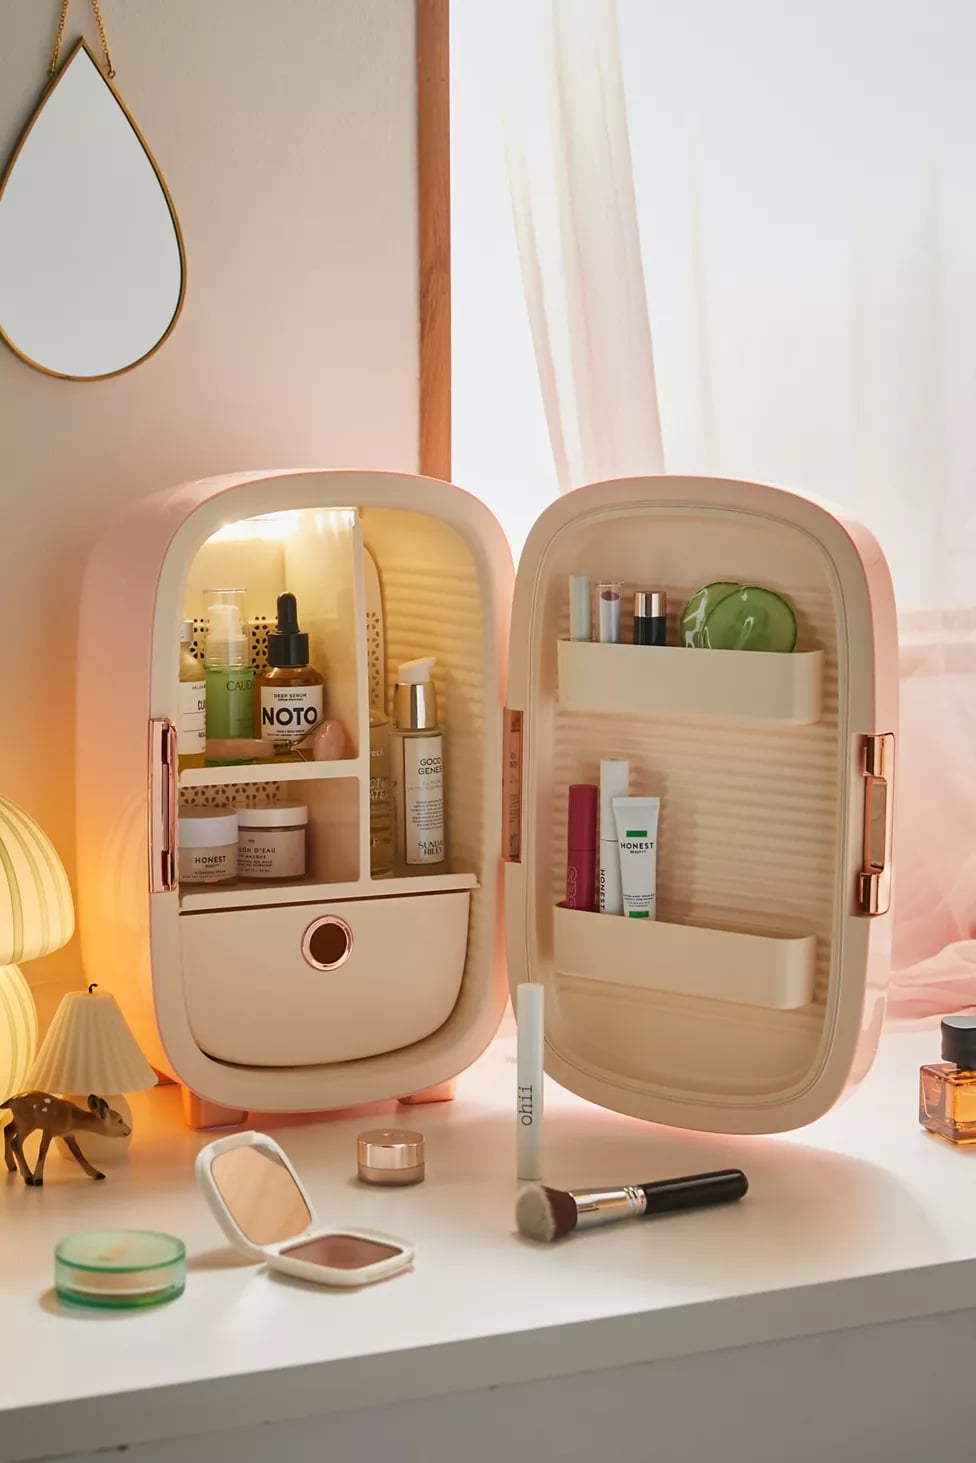 Skin Care Fridges Are Trending - Store Your Beauty Products In A Mini Fridge